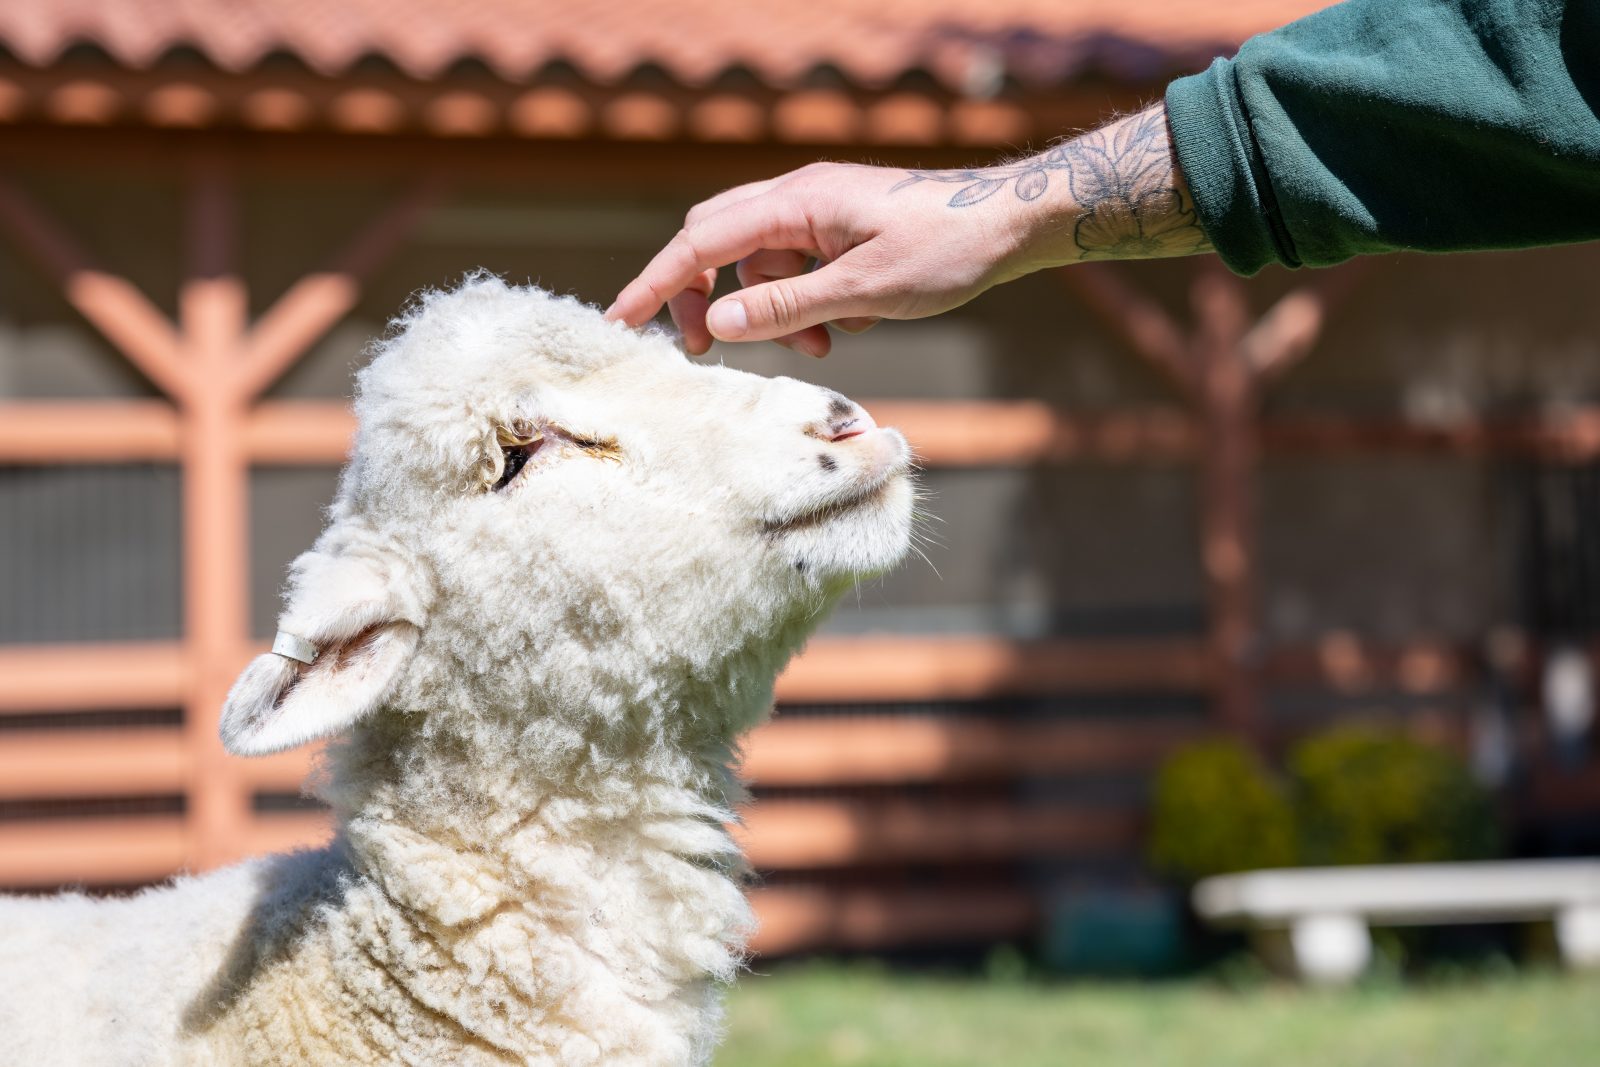 Biscuit gets a loving touch on the head from a Farm Sanctuary caregiver